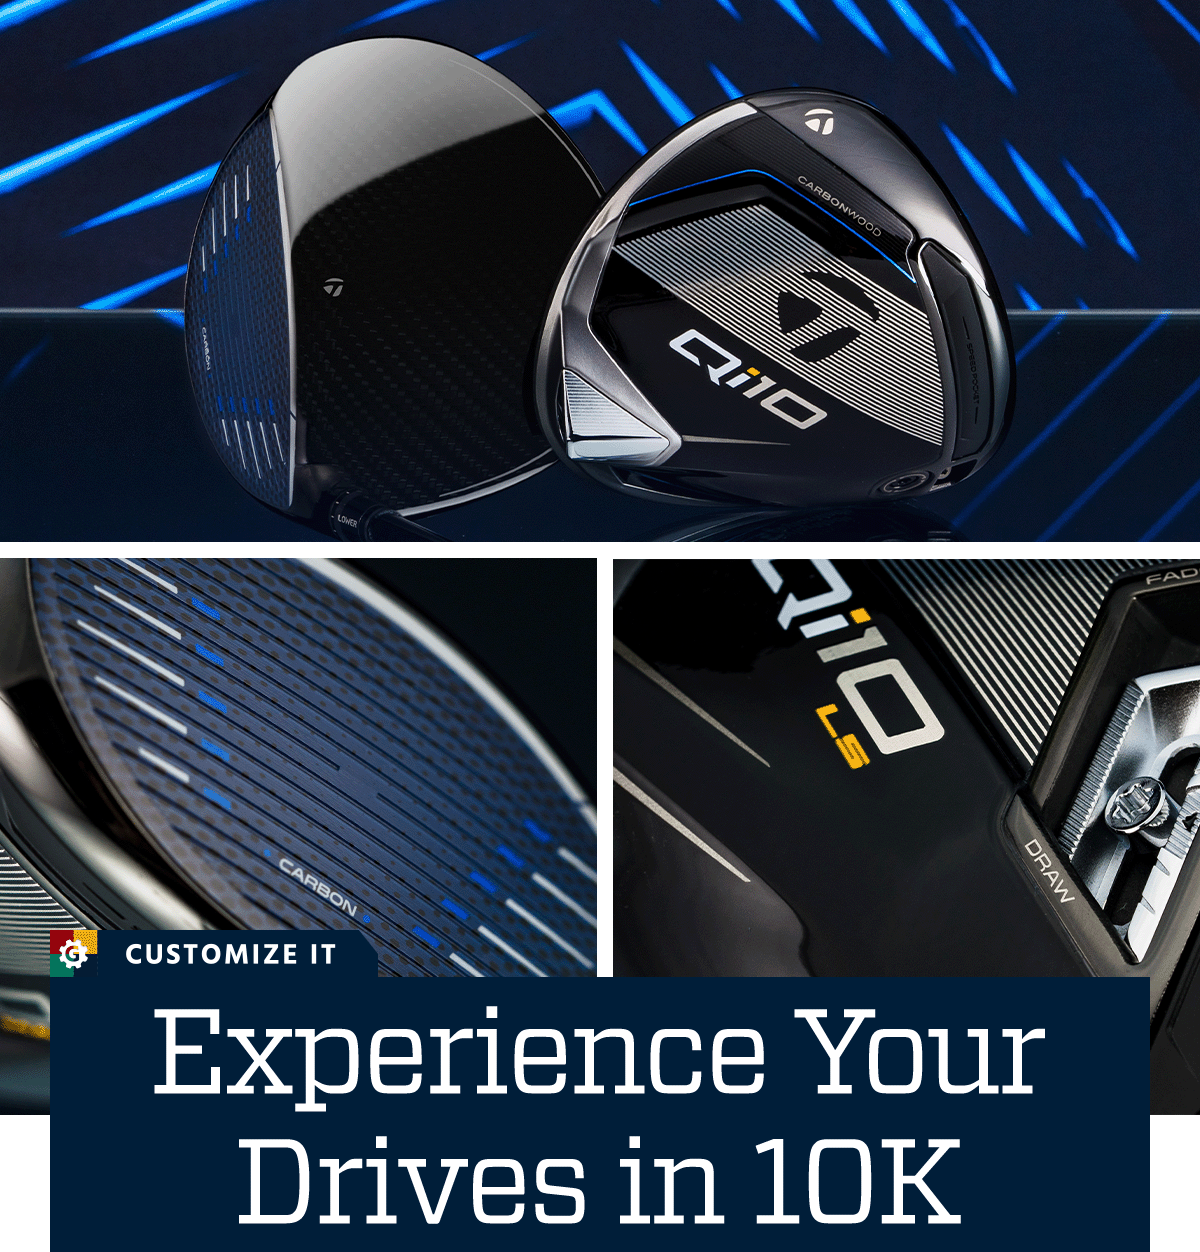  Experience your drives in 10K. Customize it.